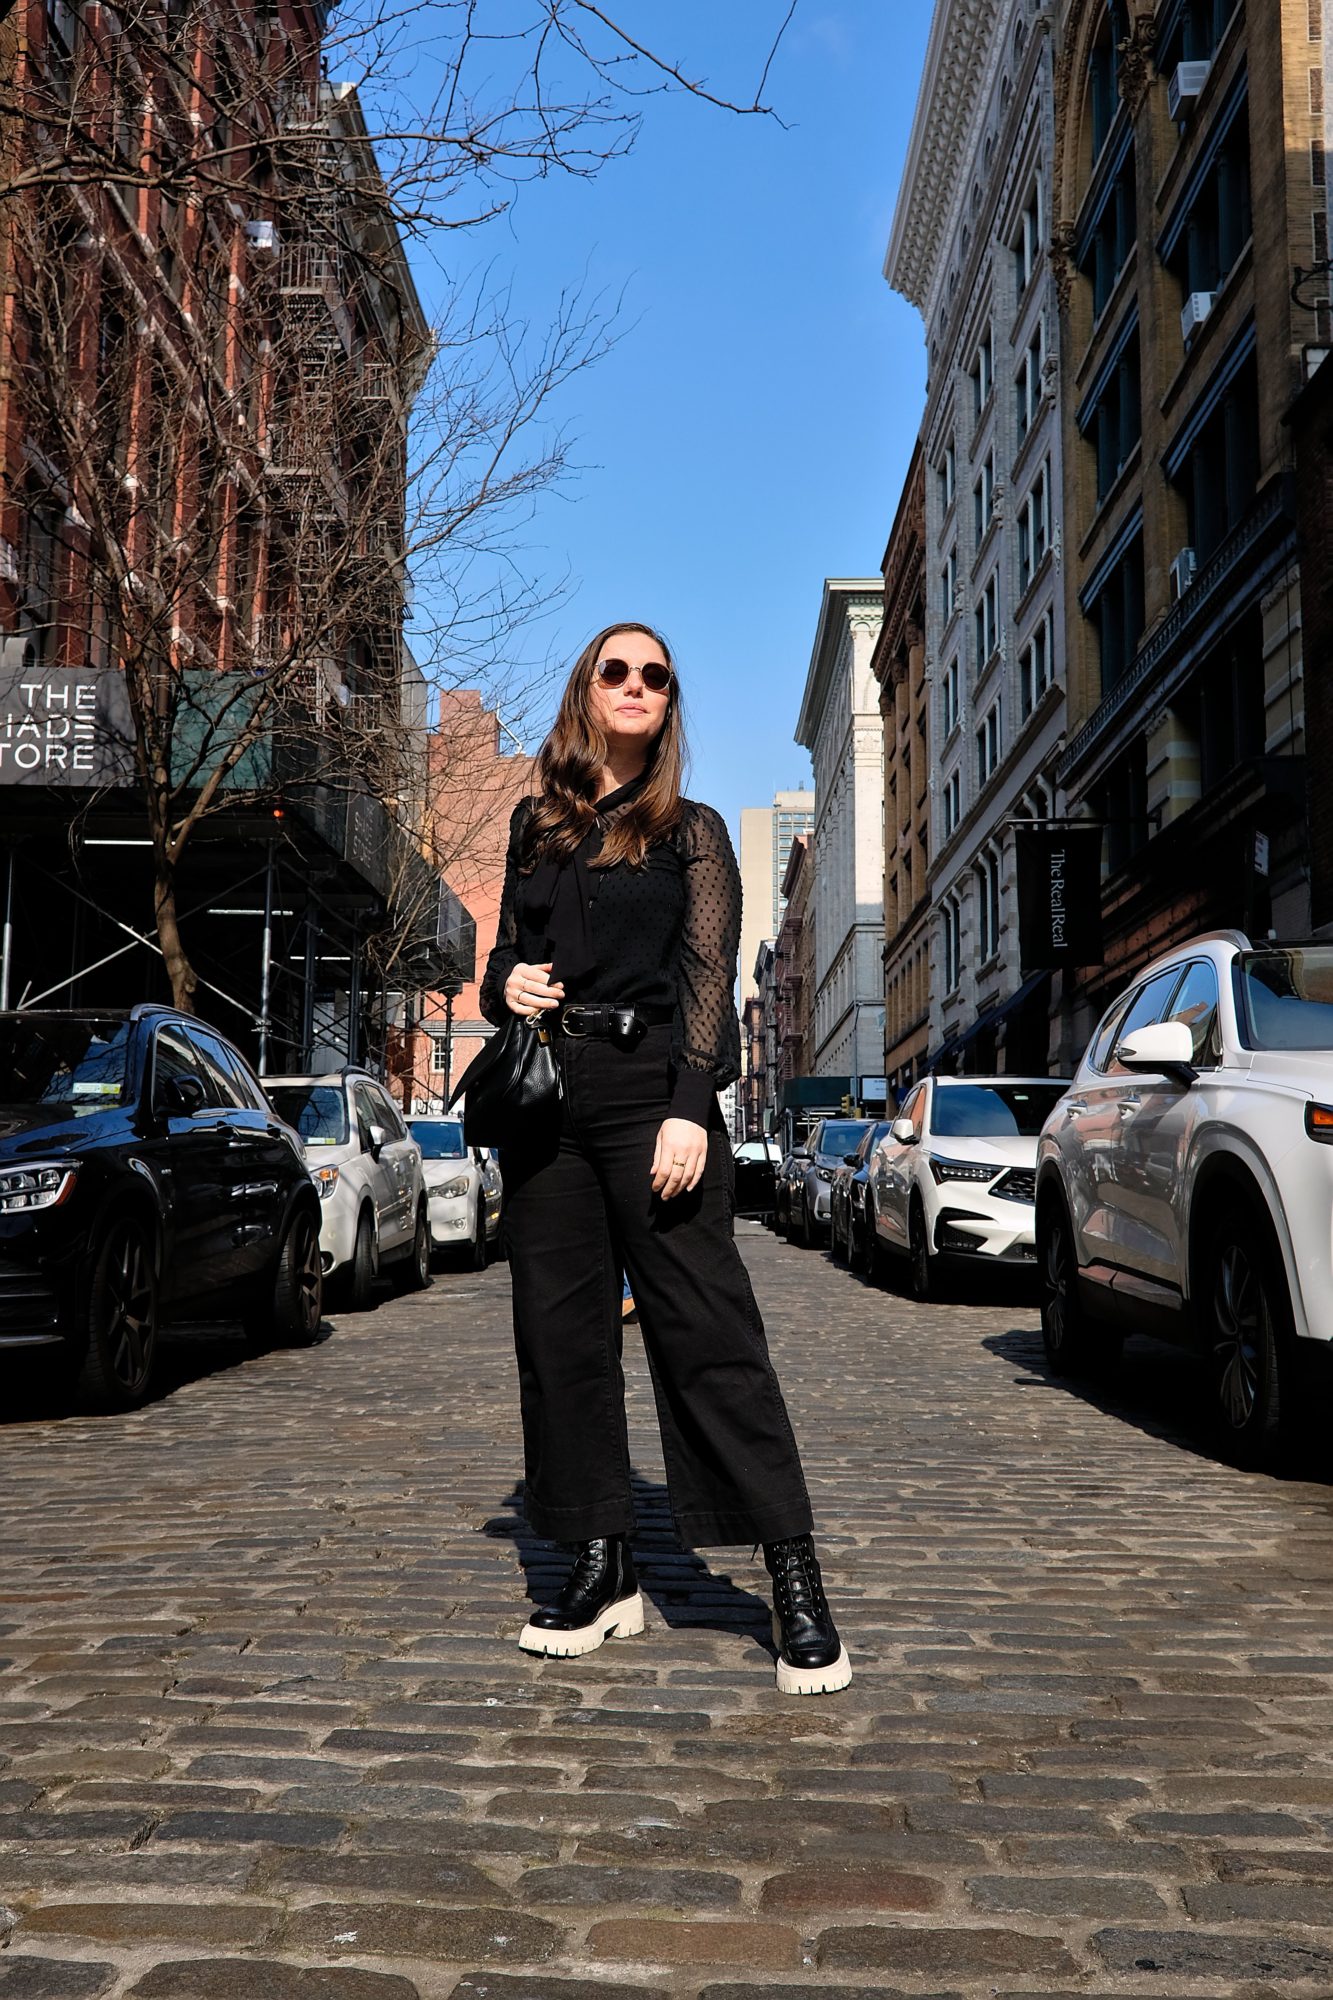 Alyssa stands on a street in SoHo in a Swiss dot top, black pants, and black boots